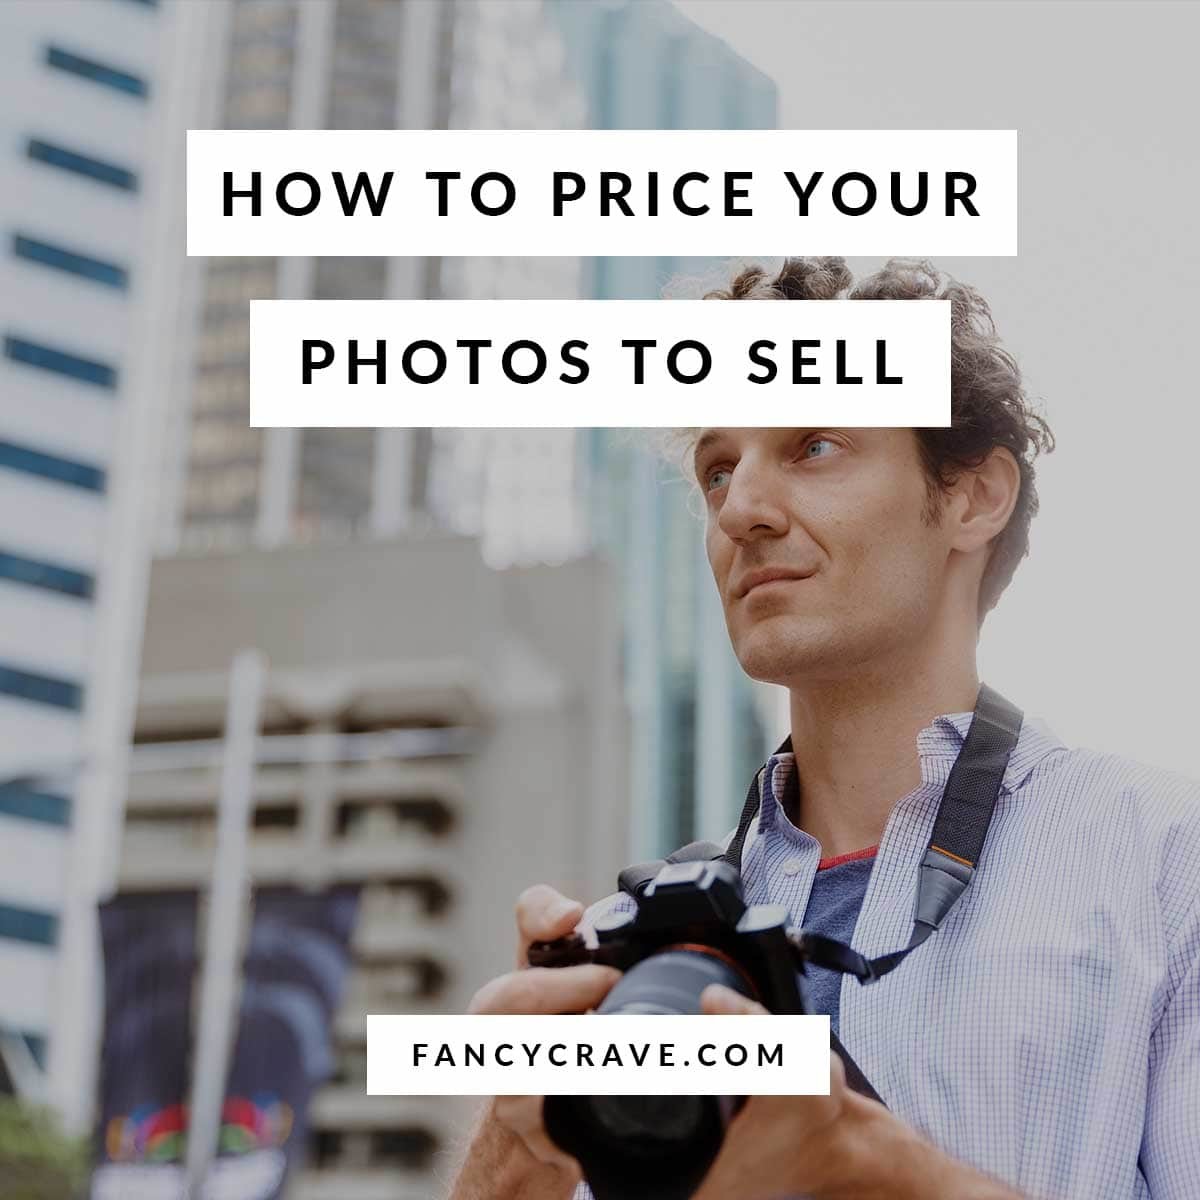 ow to Price Your Photos to Sell